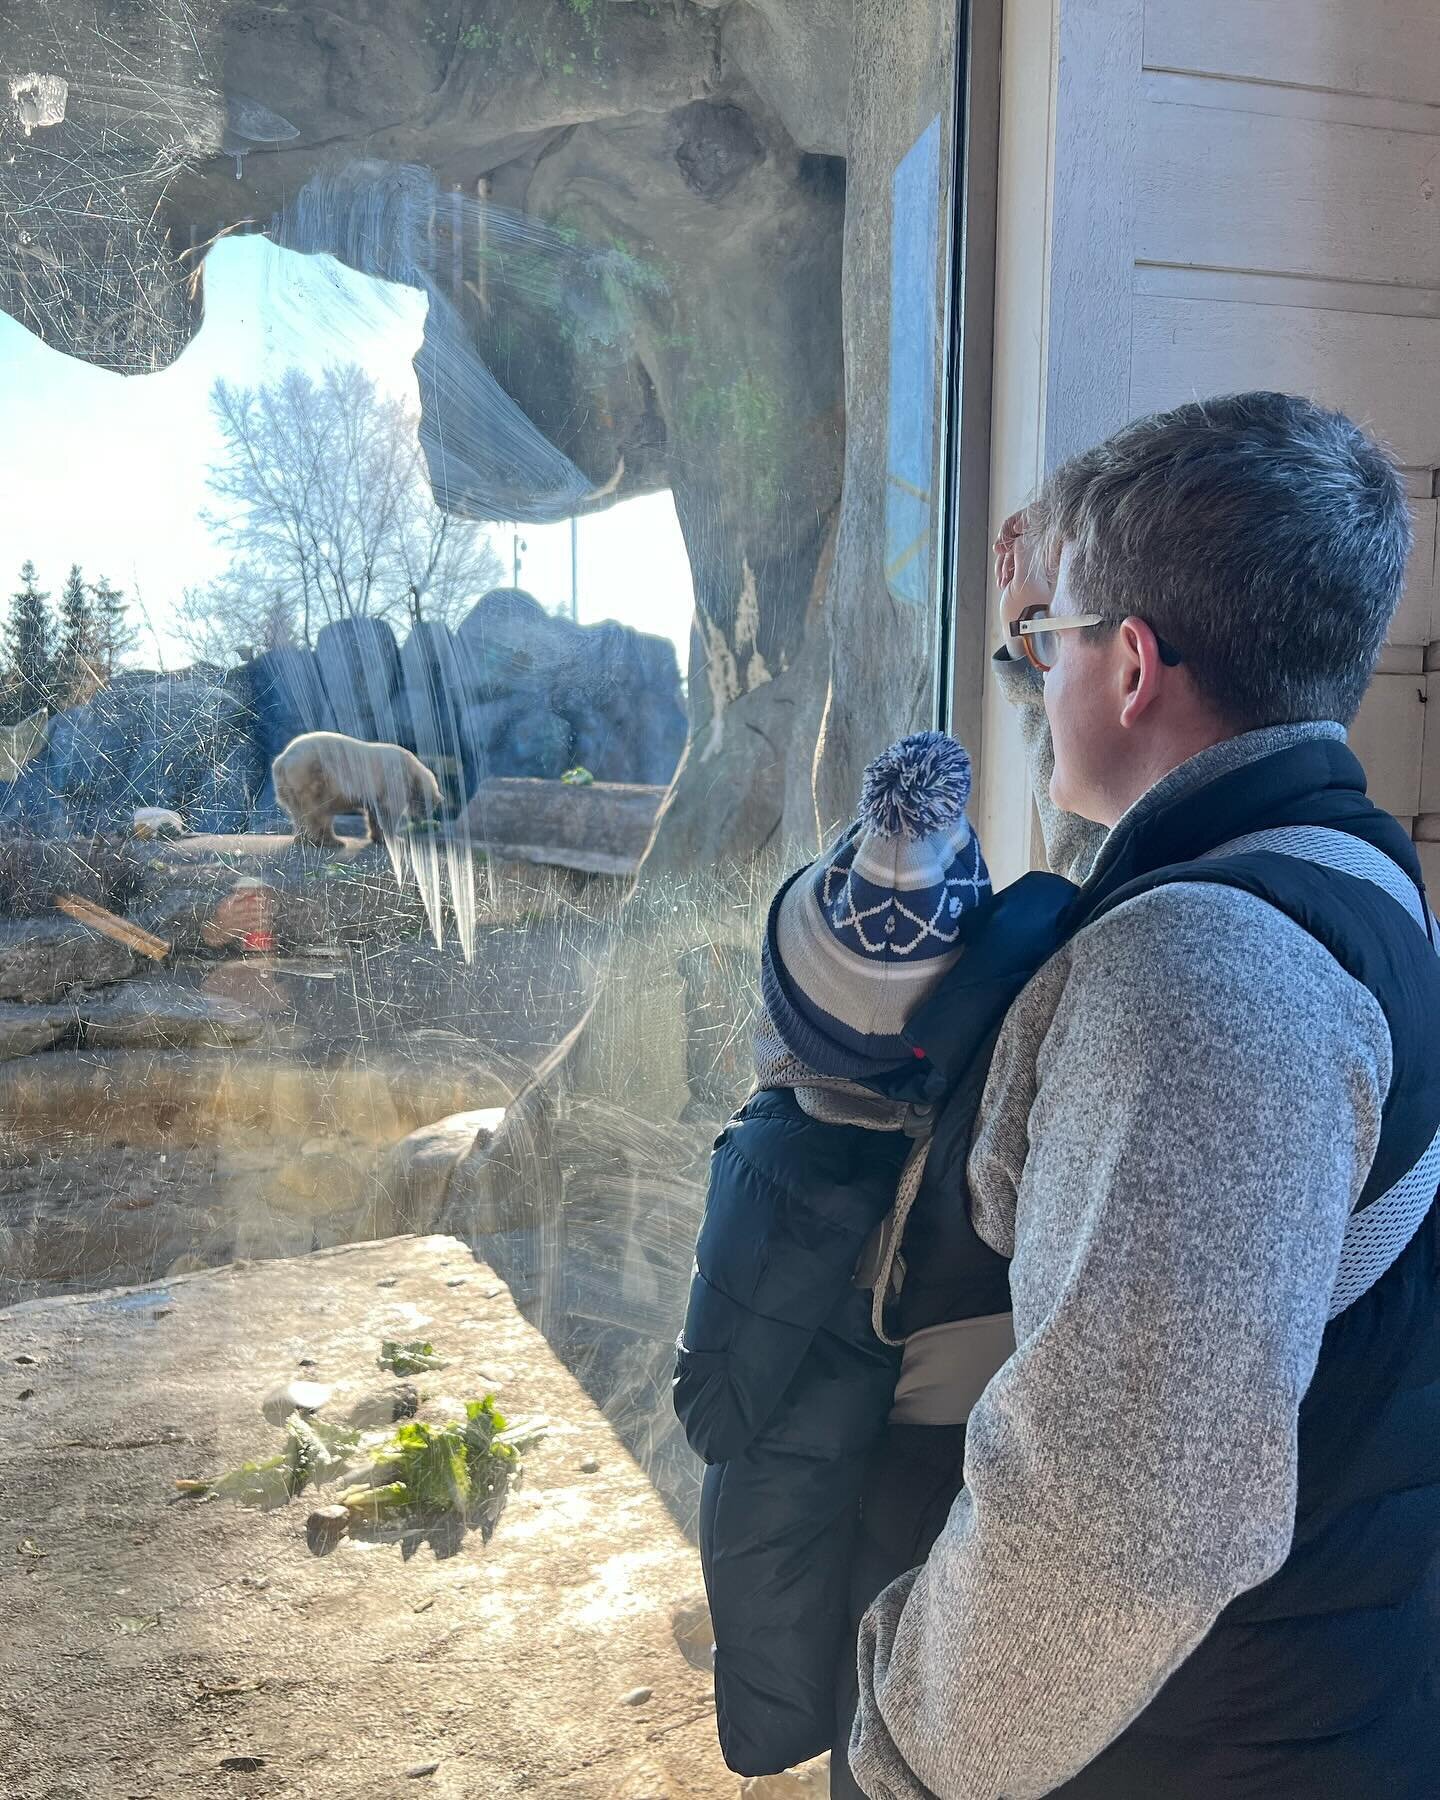 Graeme&rsquo;s first trip to the zoo - another point for Scarborough in the east side vs west side game ✅ Niko was so much of an old pro that he fell asleep for most of the animals (but really loved the tiger especially). A much-needed decompression 